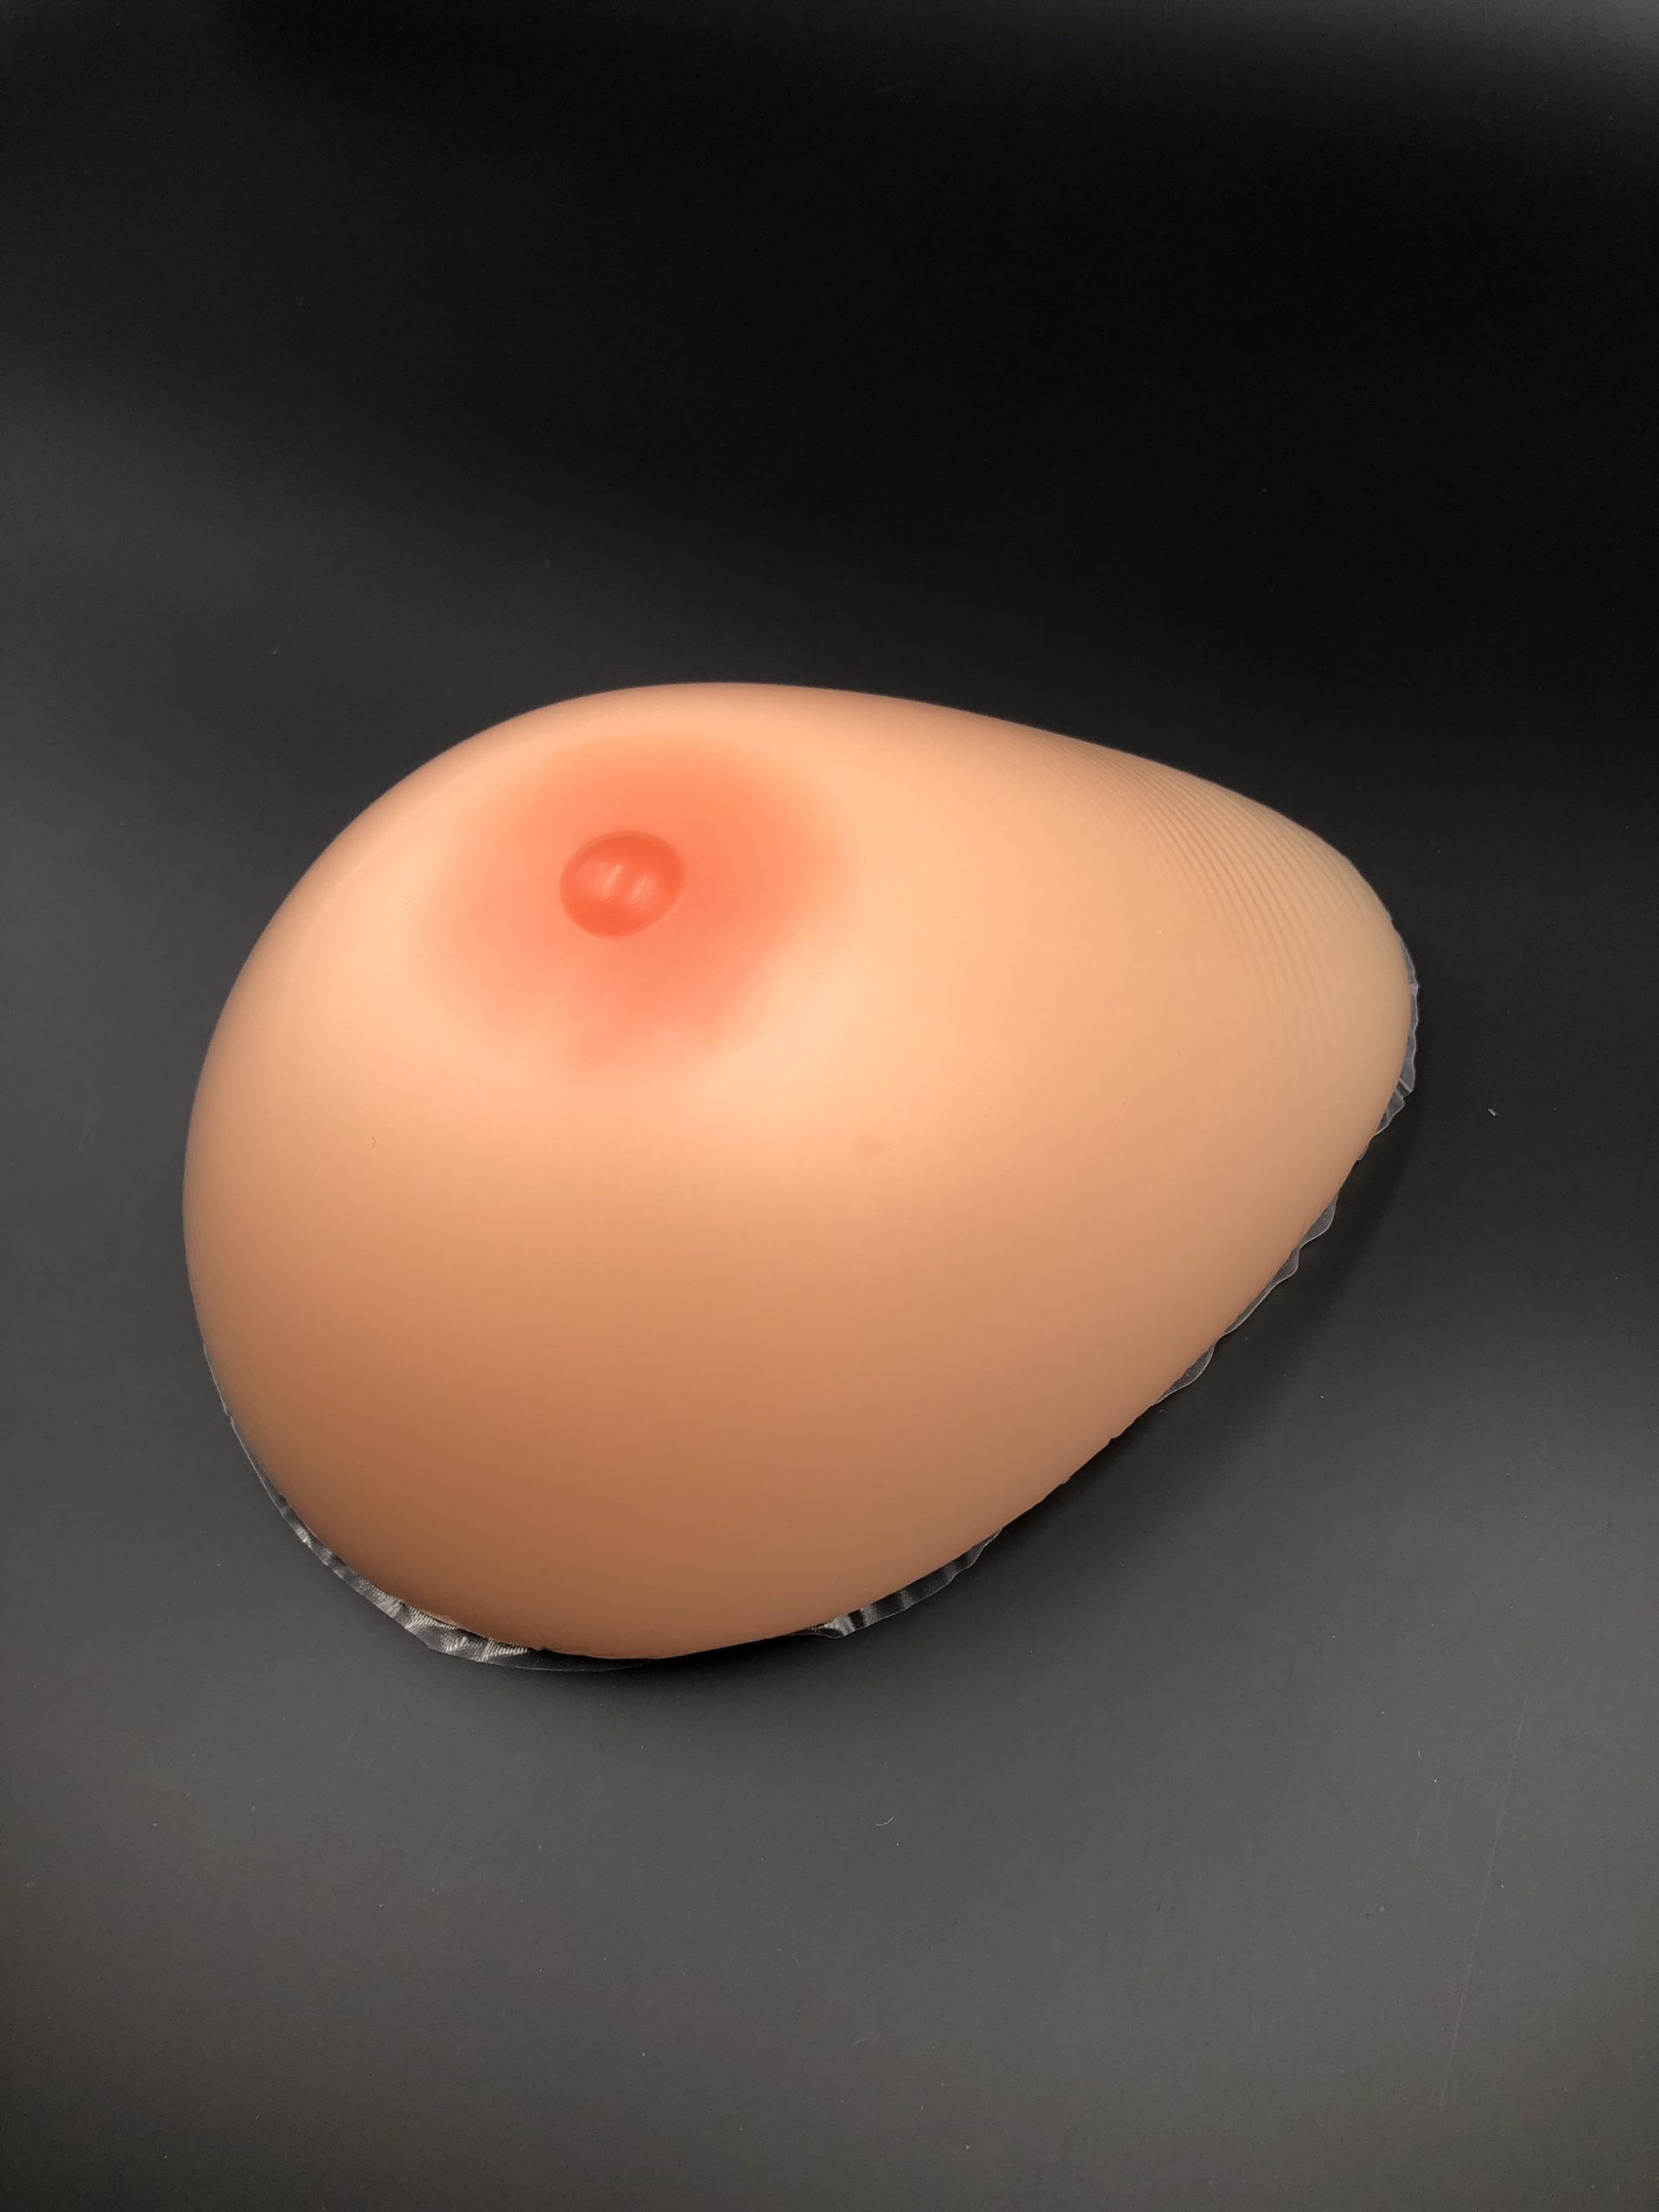 How To Make Homemade Breast Forms